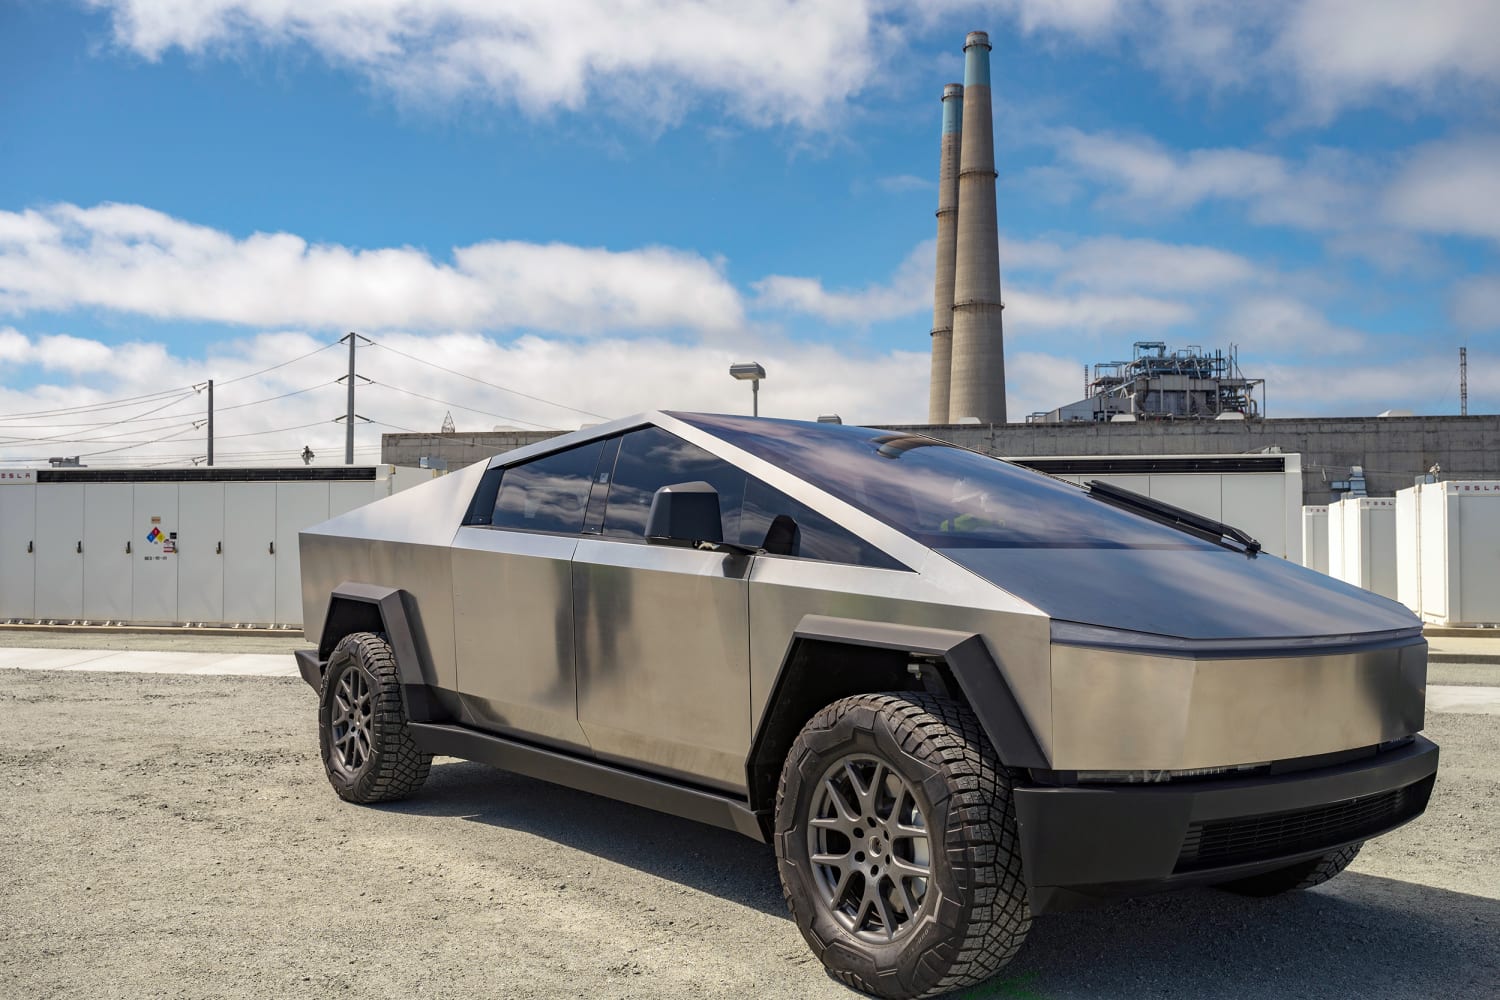 New Tesla Cybertruck Update Makes Camping Safer and More Fun: Check Out Its Cool New Gear!